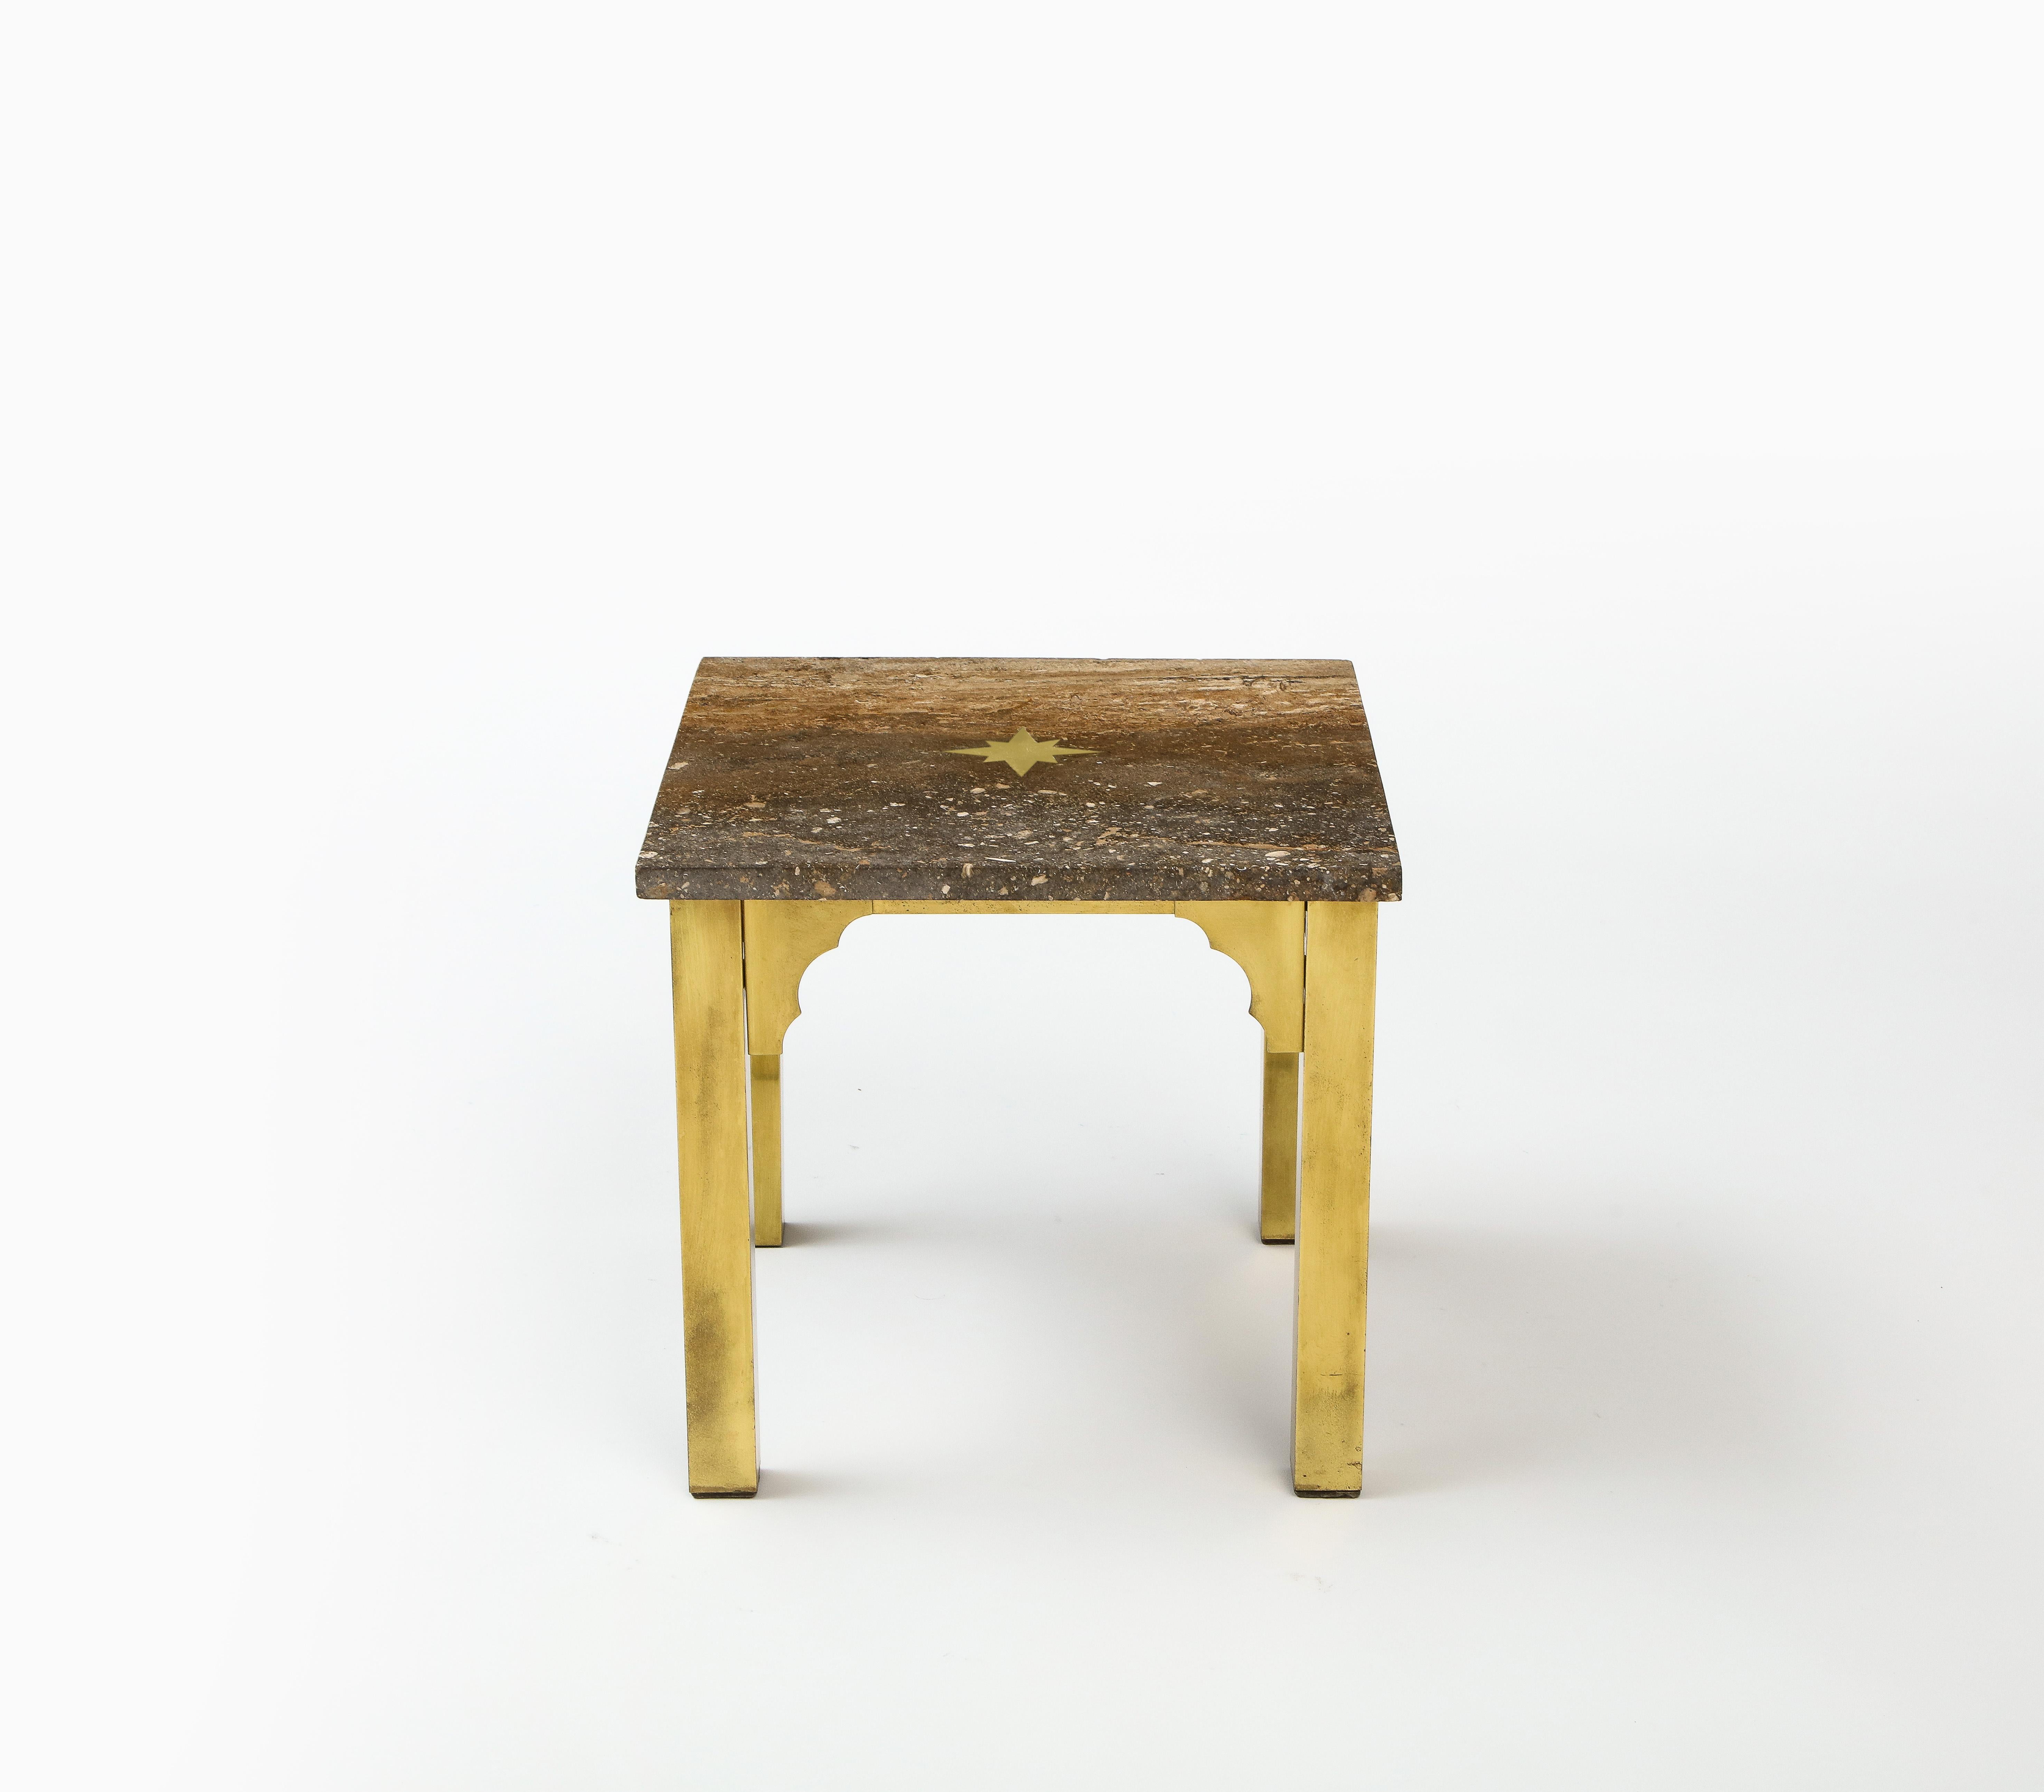 Mid-20th Century Small Square Table in Brass & Travertine, Inlay & Arabesque Details, USA 1960's For Sale